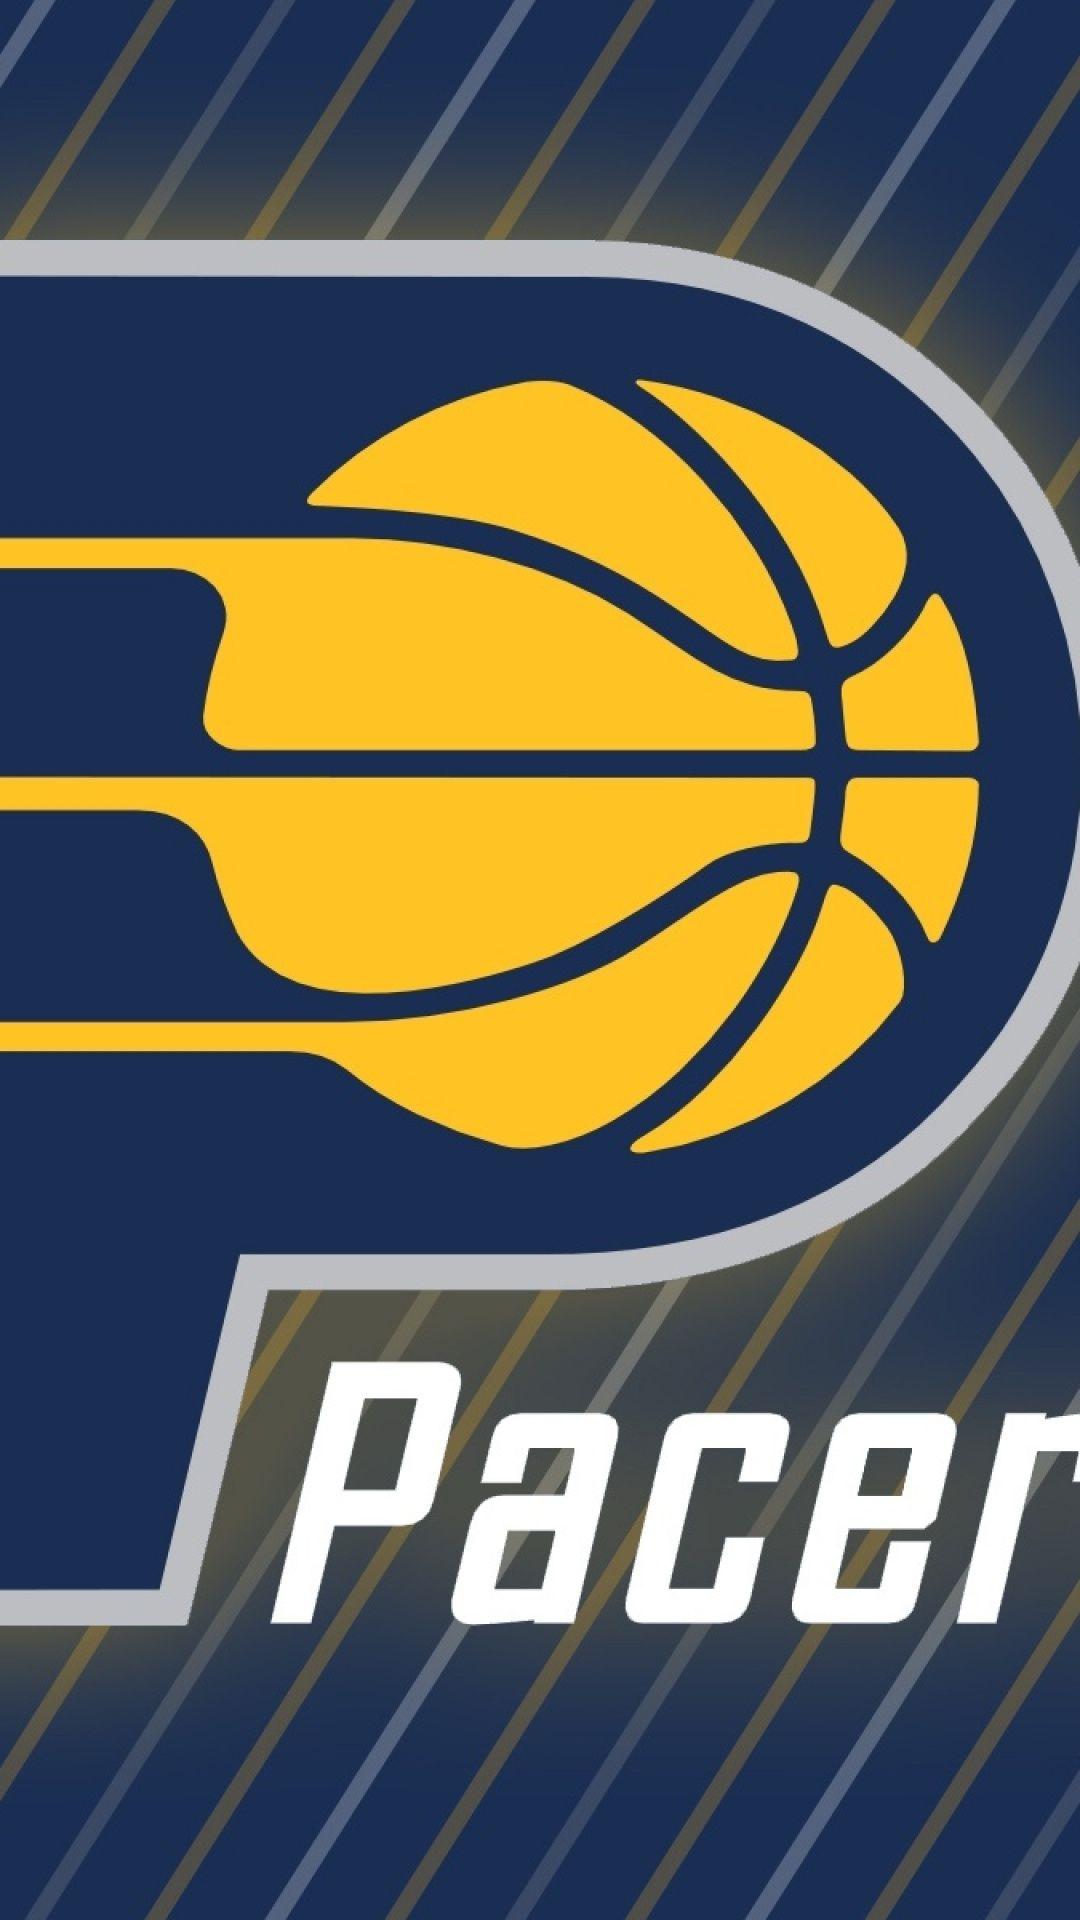 Indiana Pacers iPhone 5 Wallpaper